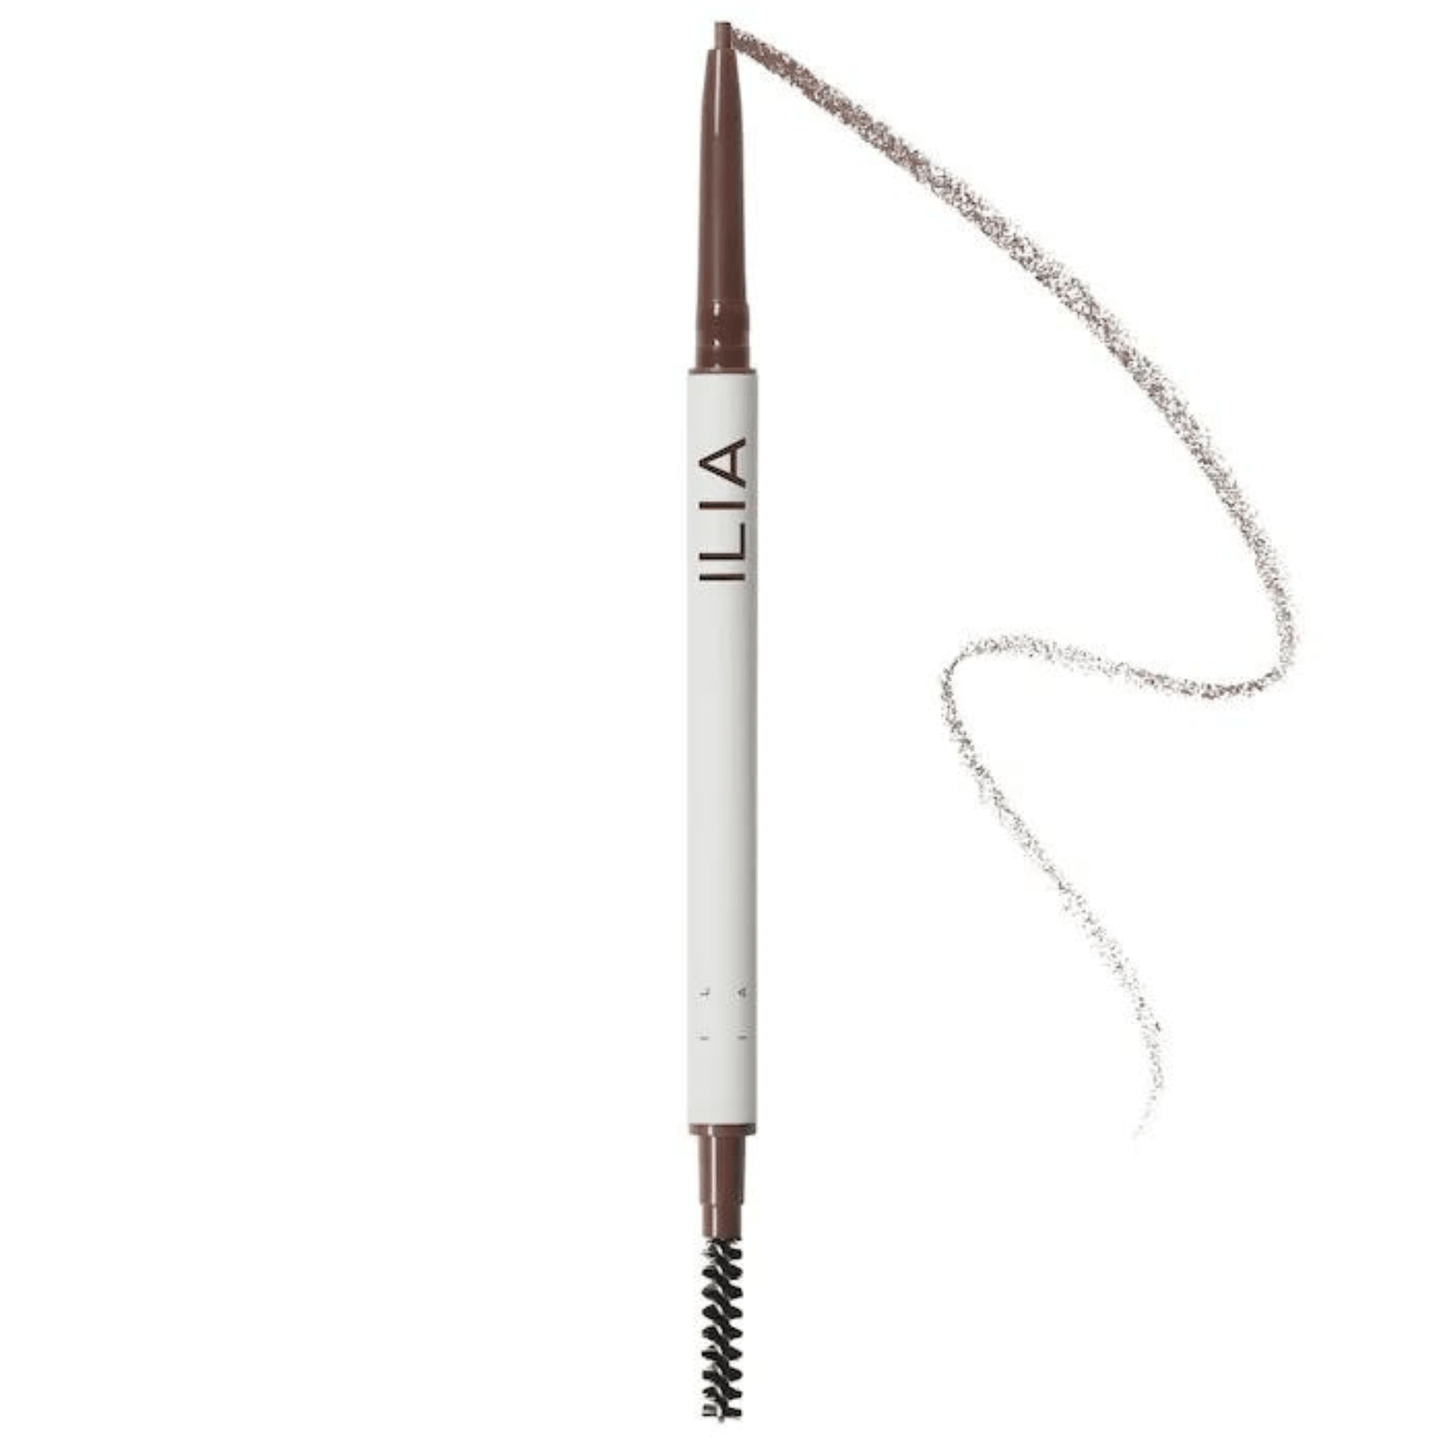 Primary Image of Brow Pencil - Soft Brown